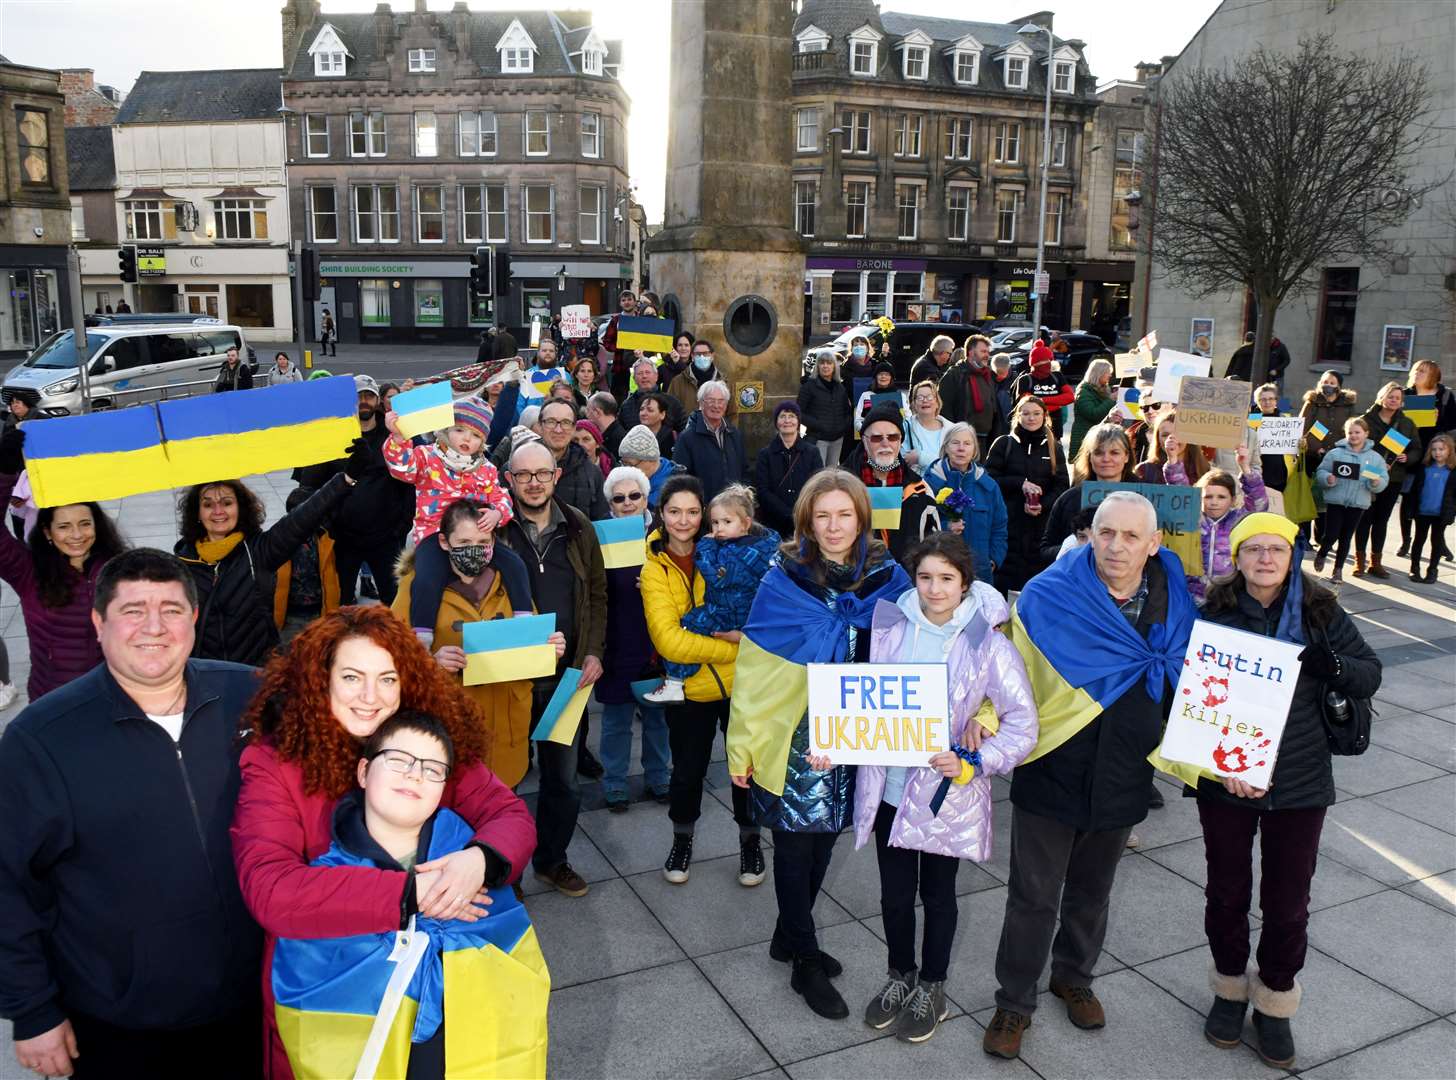 The Highlands Support Refugees arranged a vigil to voice their opposition to the invasion of Ukraine on Falcon Square in Inverness.